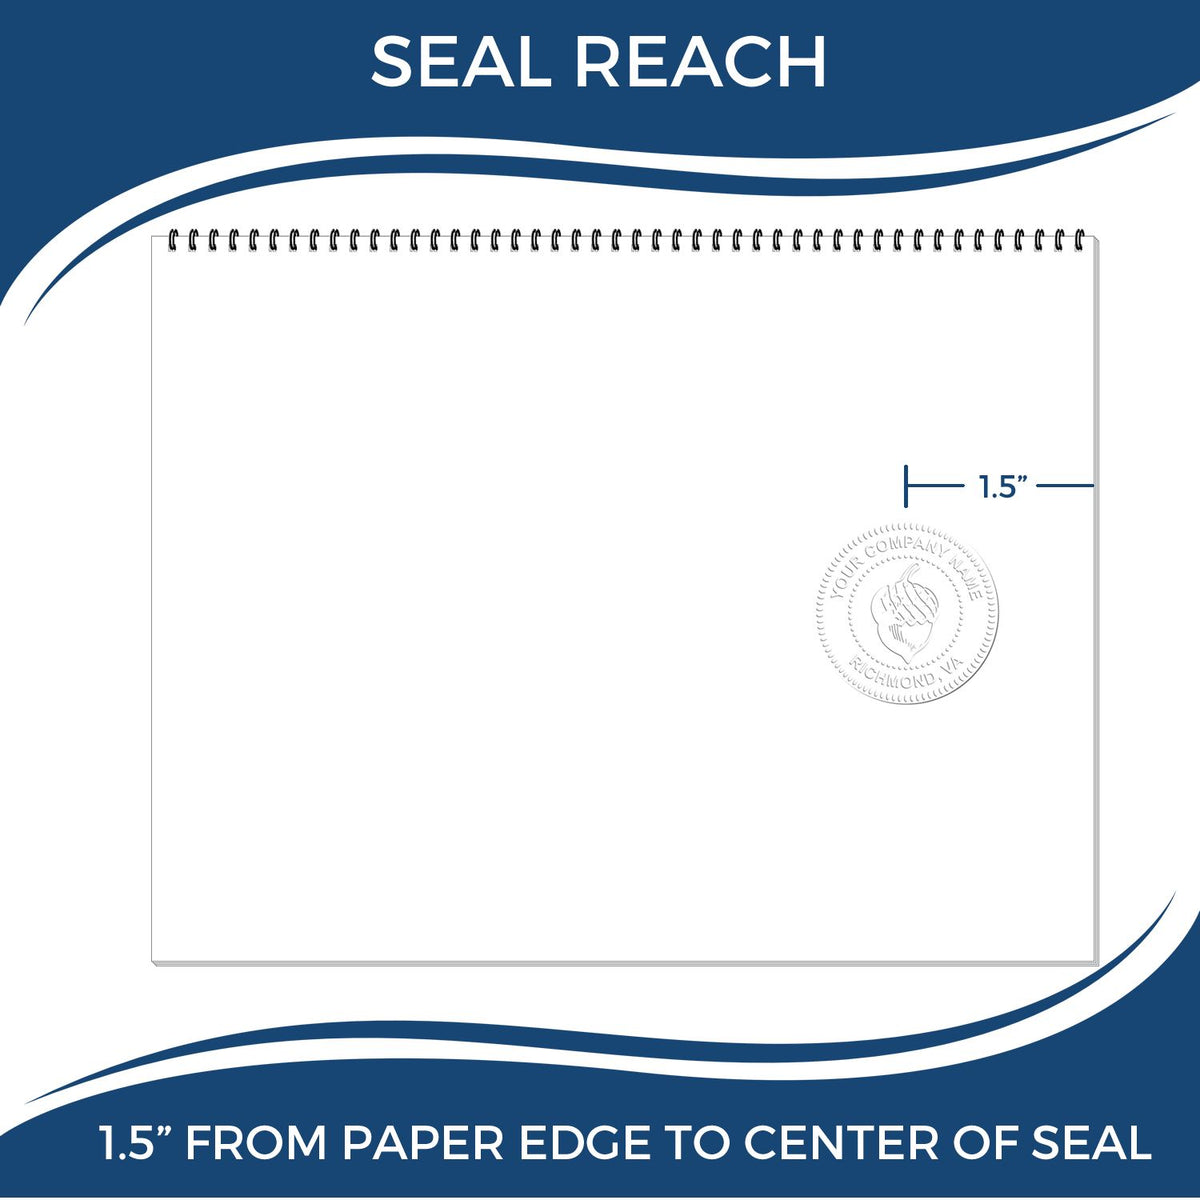 An infographic showing the seal reach which is represented by a ruler and a miniature seal image of the Hybrid Louisiana Land Surveyor Seal